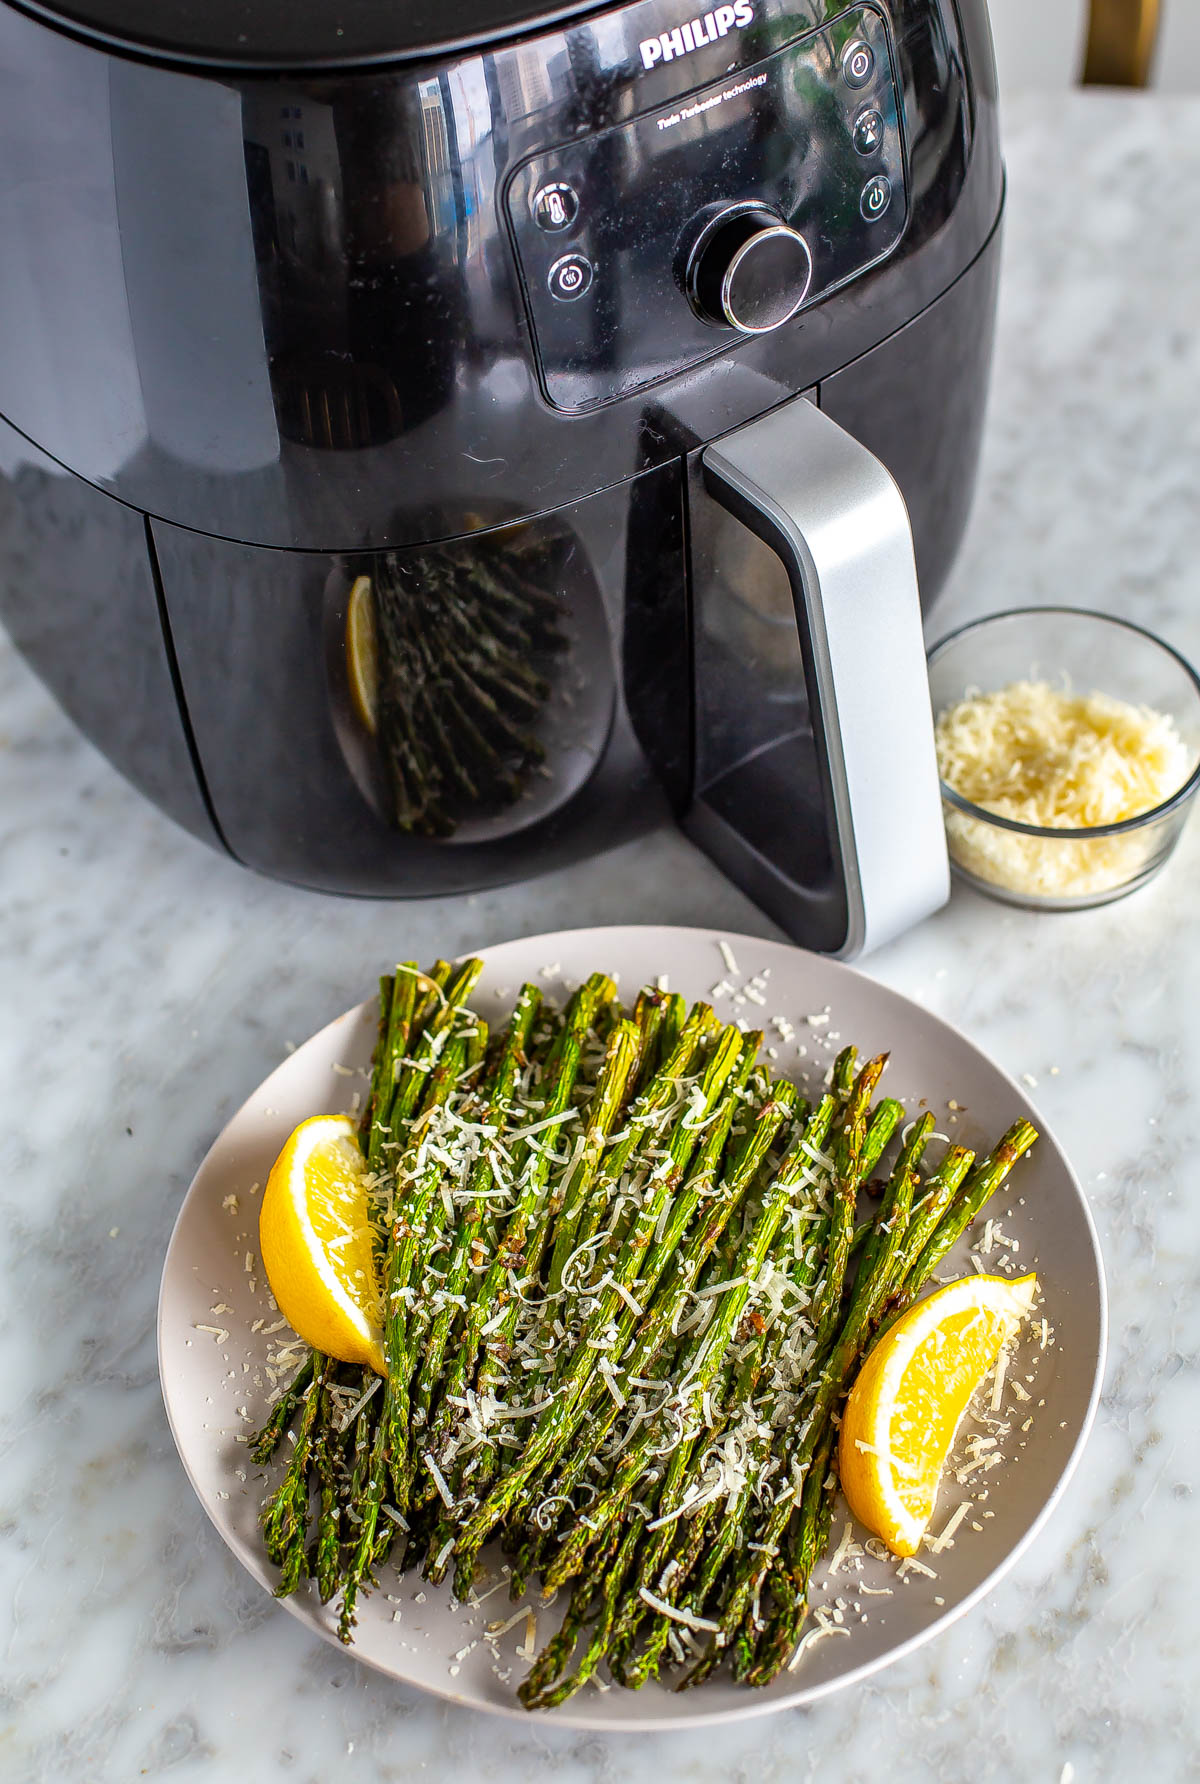 An air fryer in the background with a plate of garlic parm air fryer asparagus in the foreground.